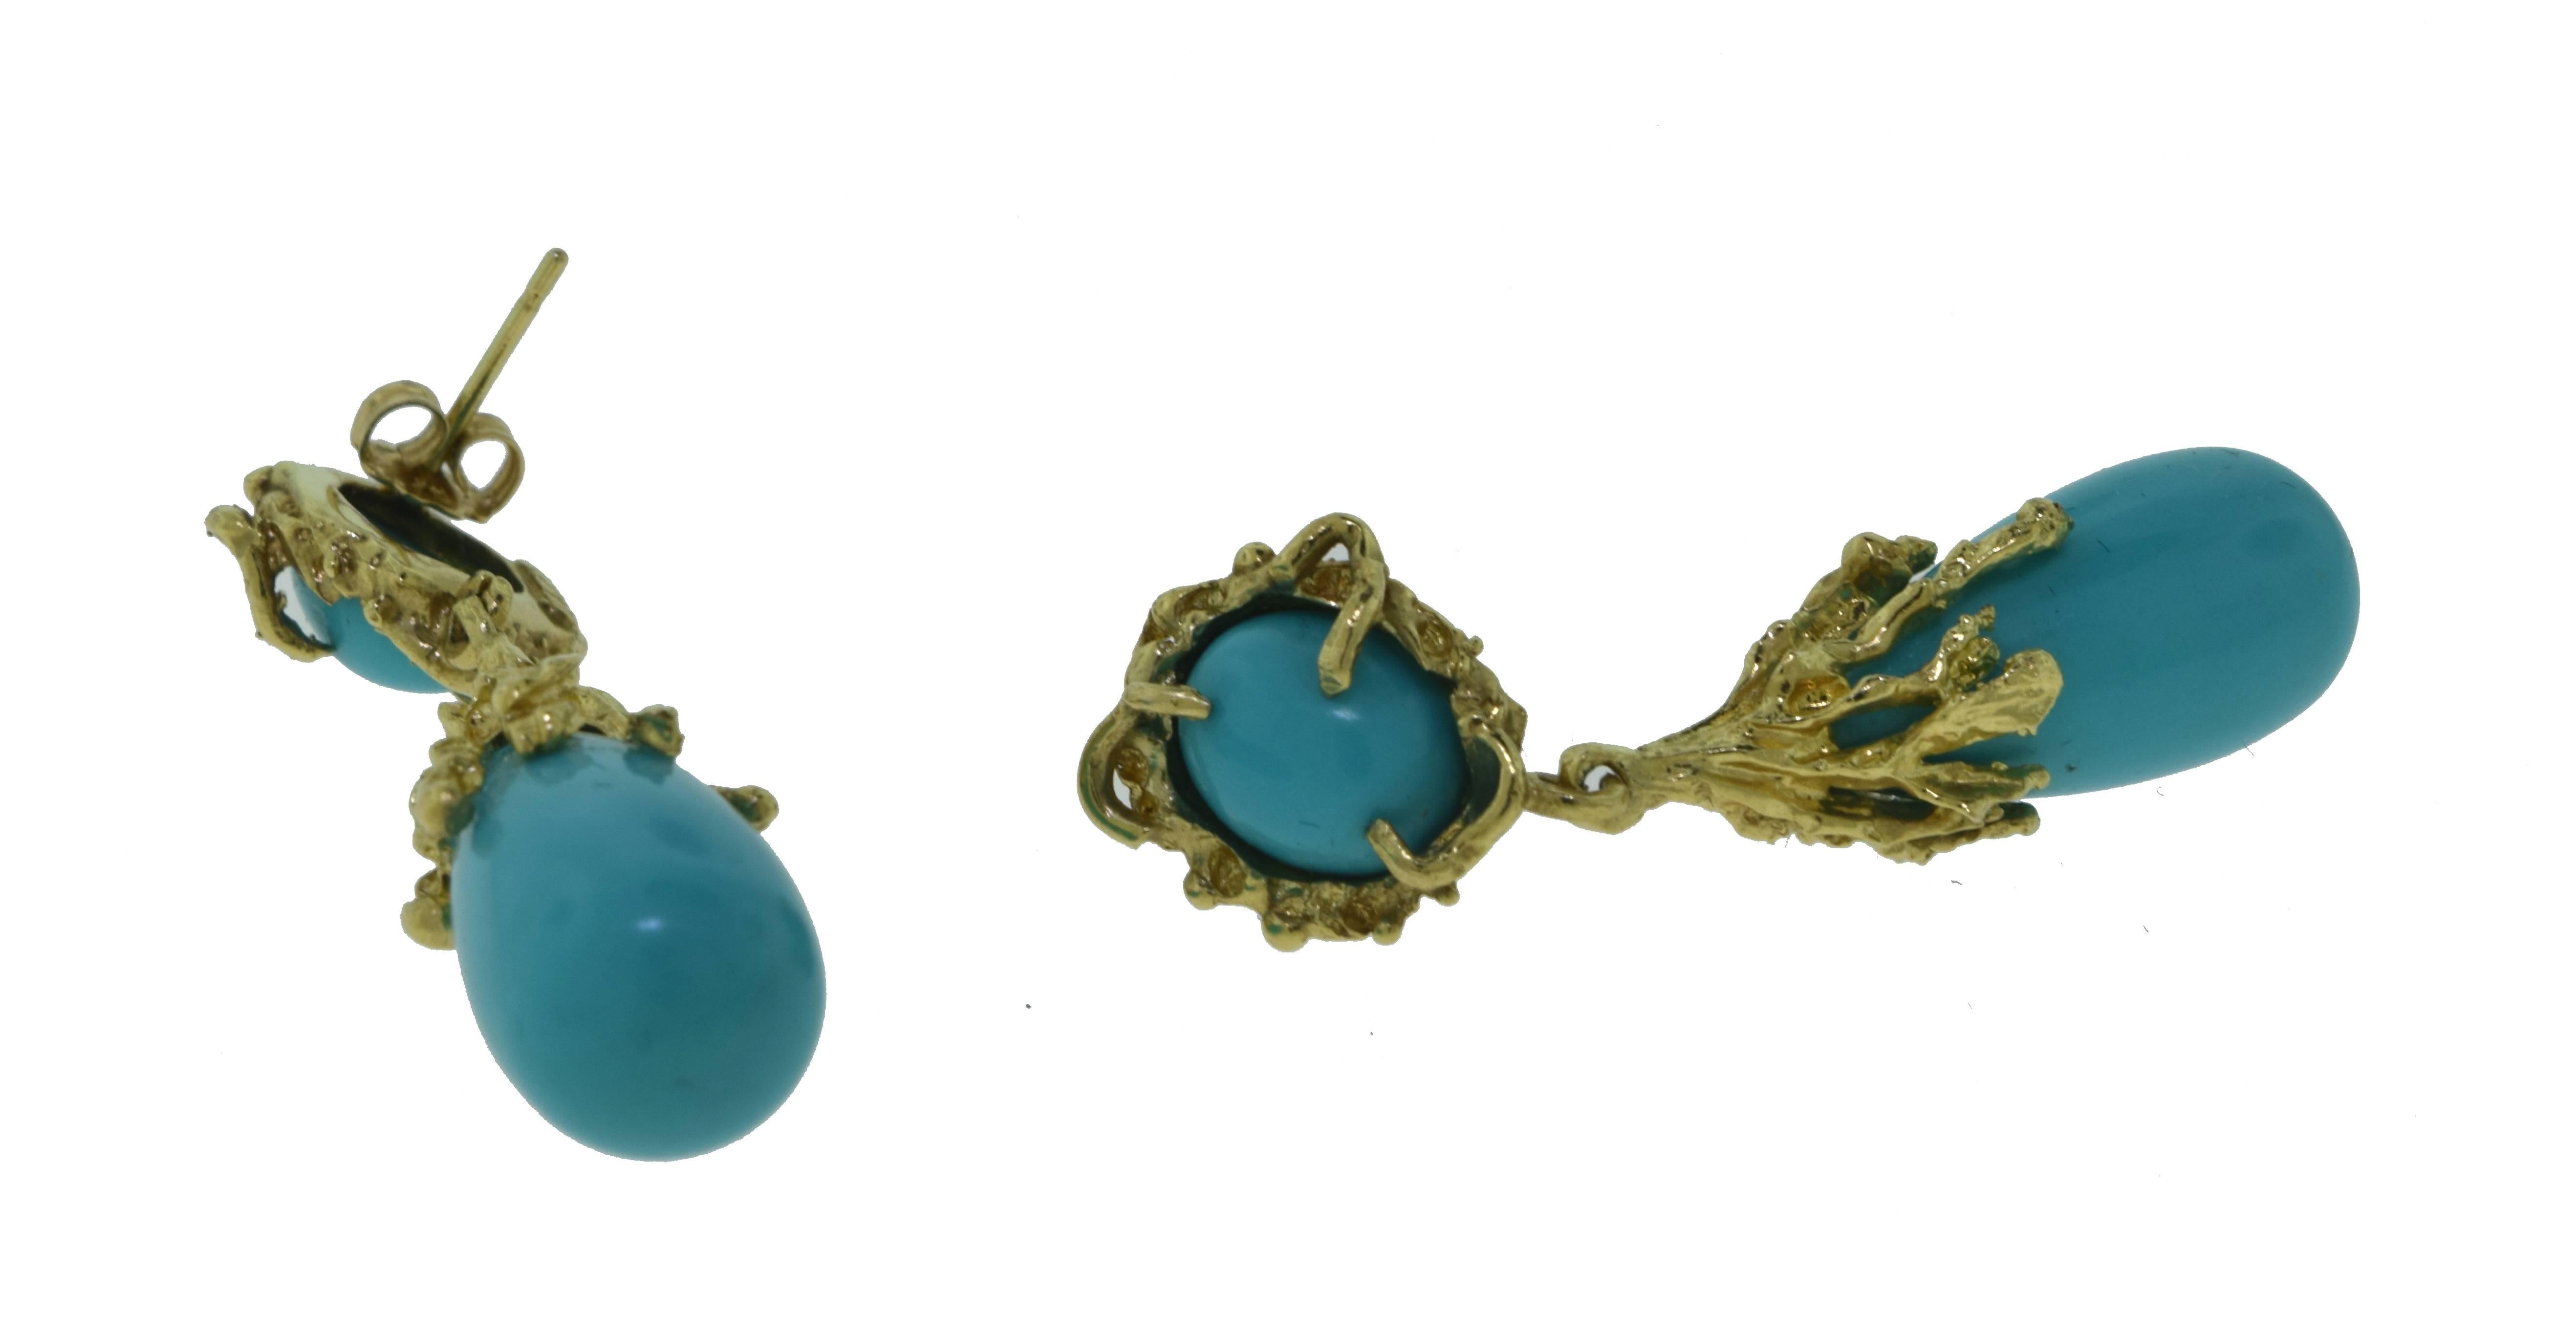 Magnificent Vintage Earrings in 14k yellow gold (marked) and tested, with Gorgoeus Natural Blue Turquoise. Pure sky-blue color without matrix, black veins, or any other inclusions. 
Metal: Yellow Gold
Metal Purity: 14k
Stone: Natural Blue